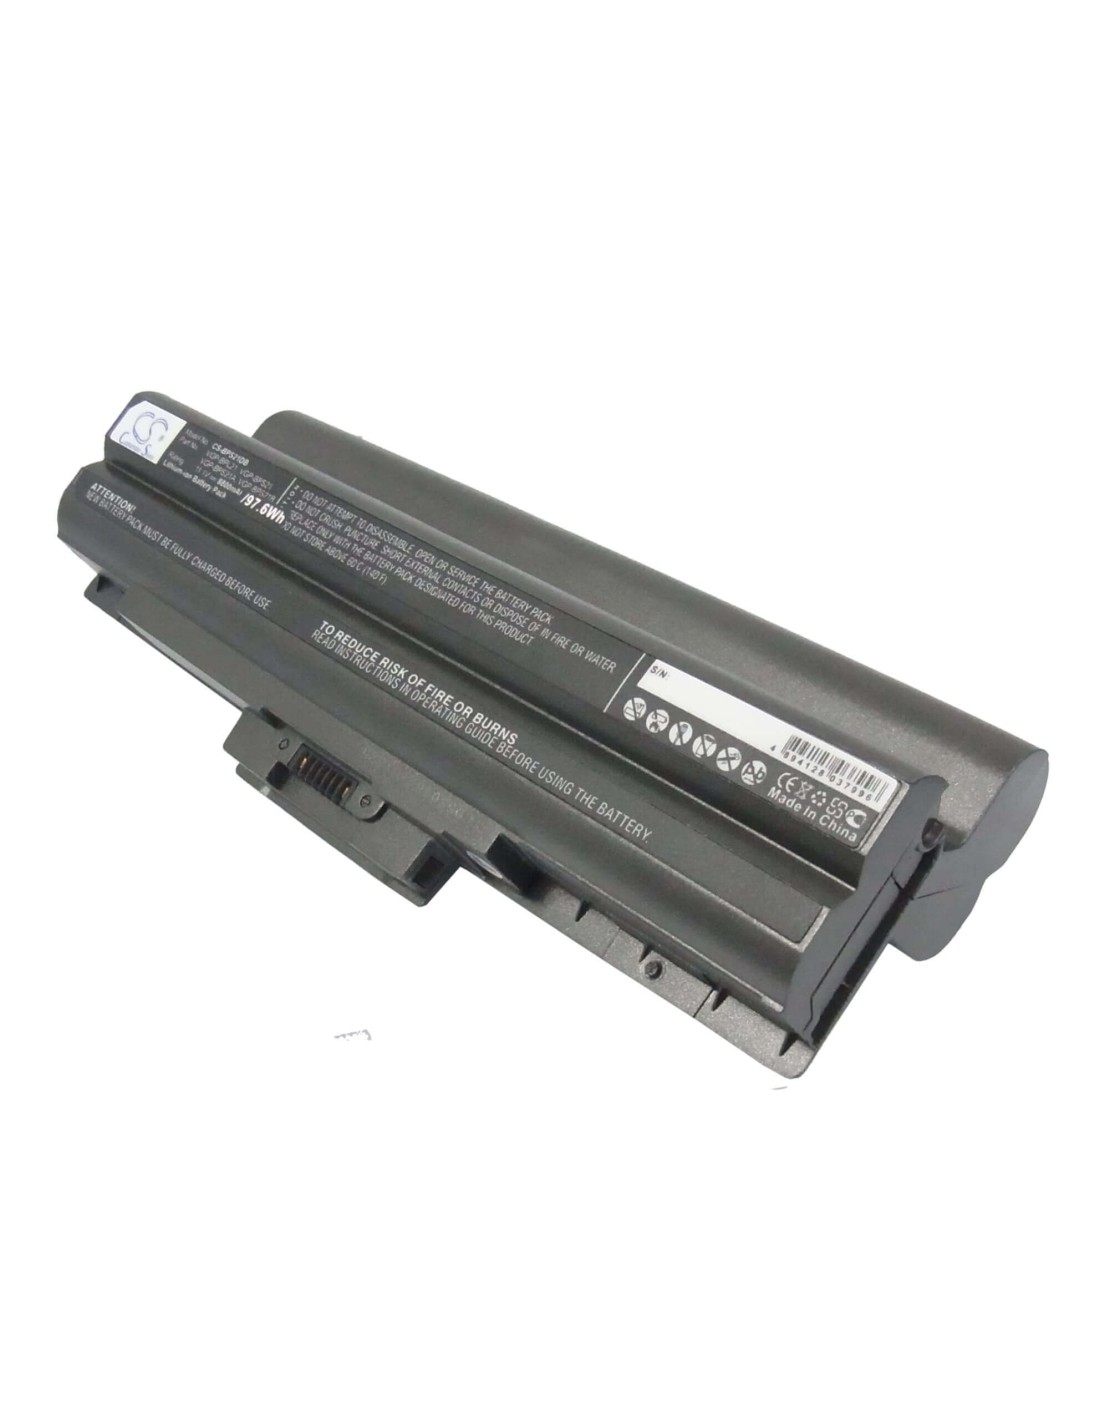 Black Battery for Sony Vaio Vgn-aw41jf, Vaio Vgn-aw41mf, Vaio Vgn-aw41xh 11.1V, 8800mAh - 97.68Wh